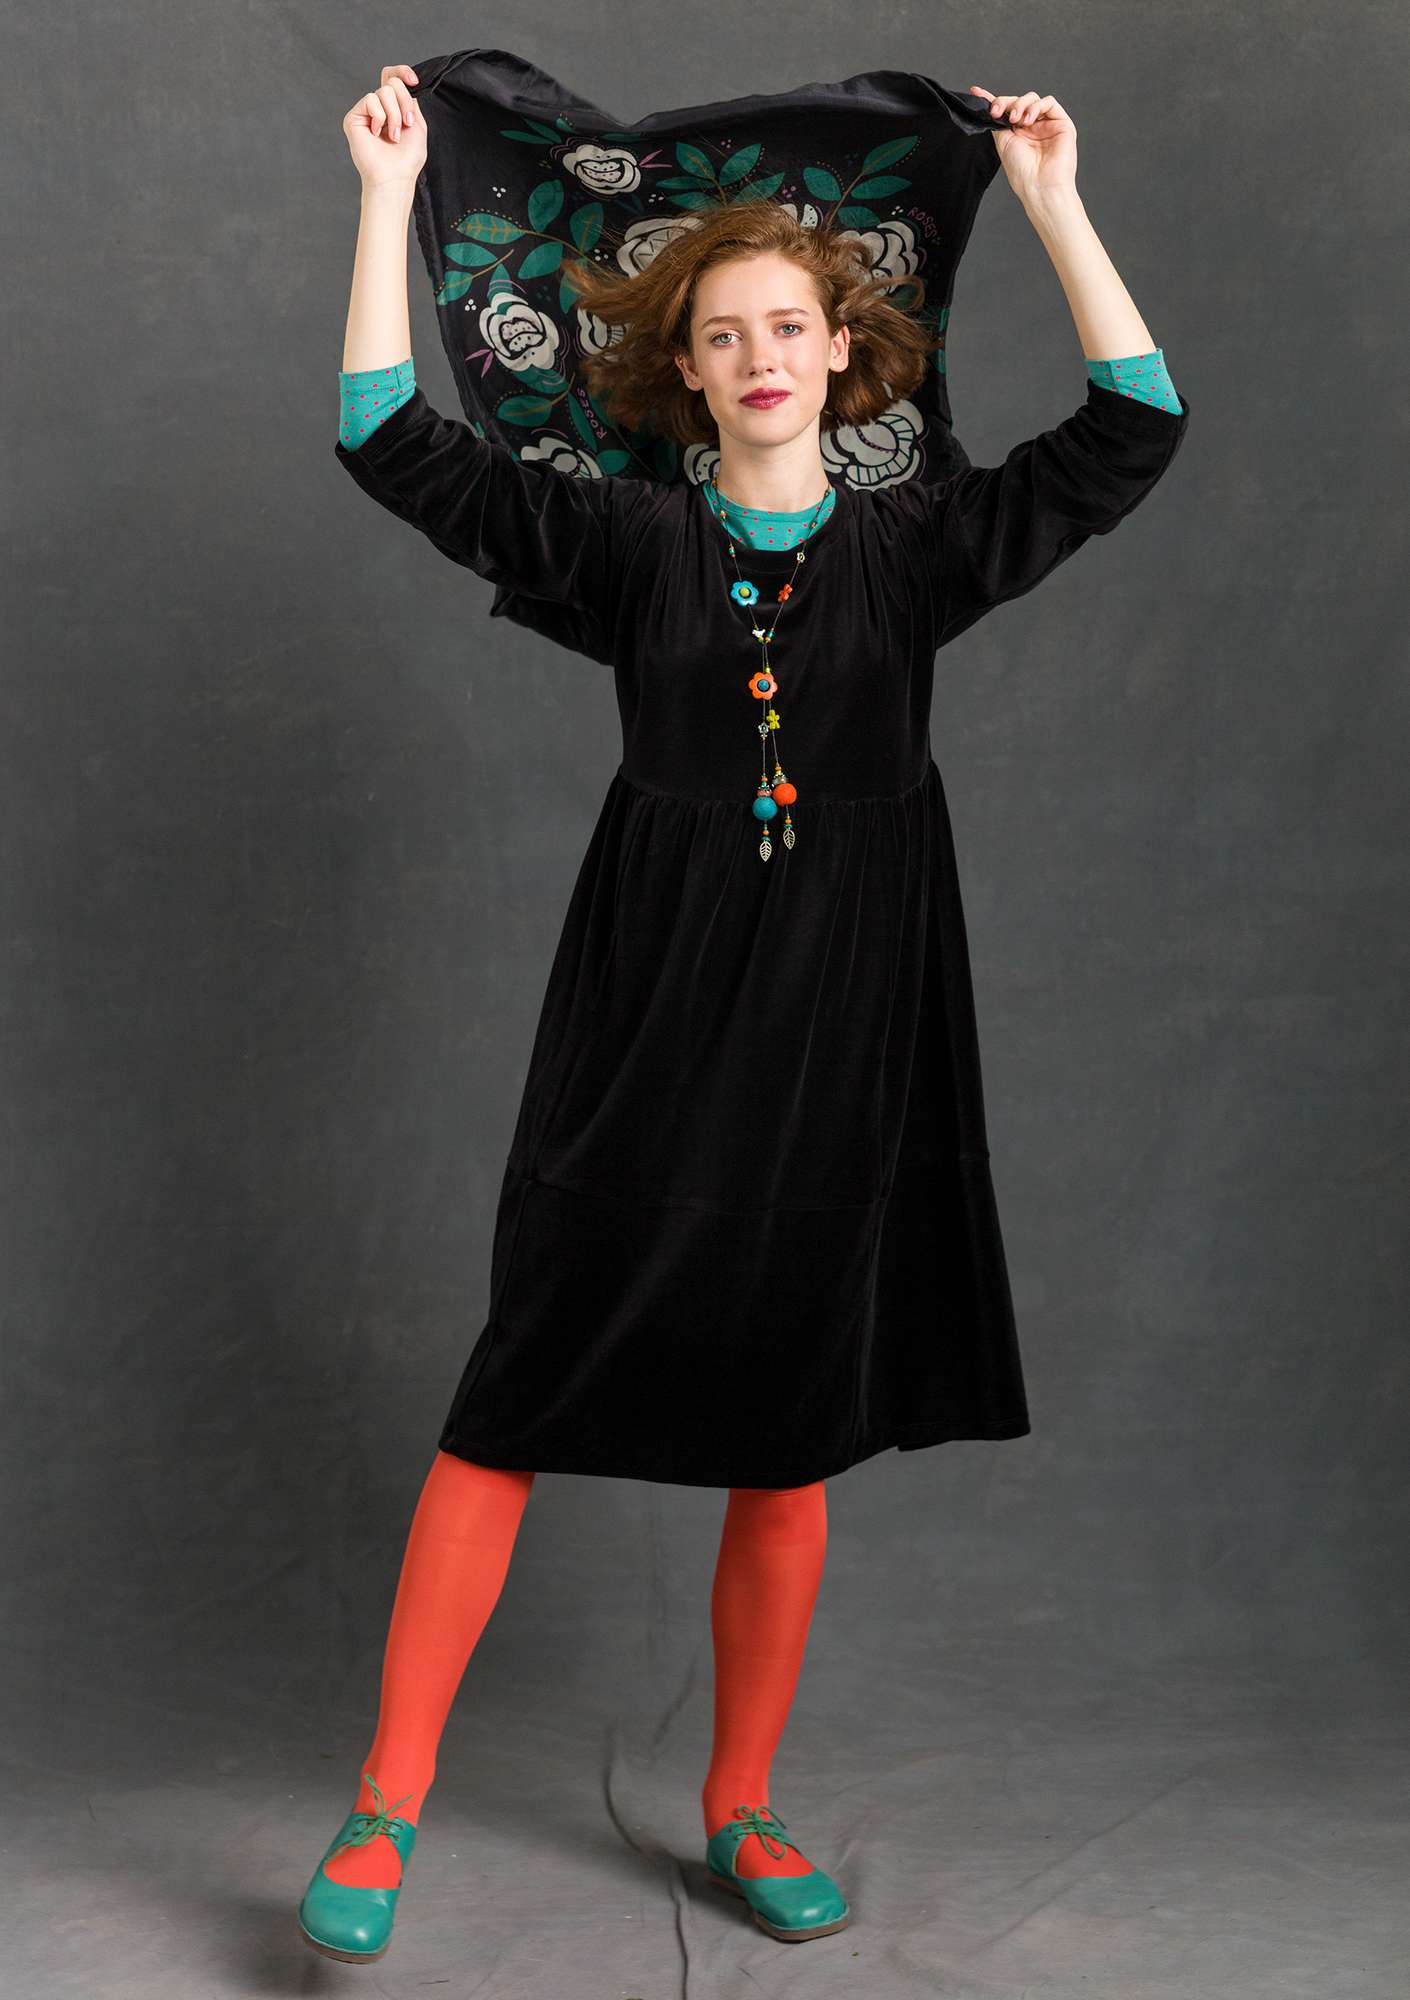 Velour dress in organic cotton/recycled polyester black